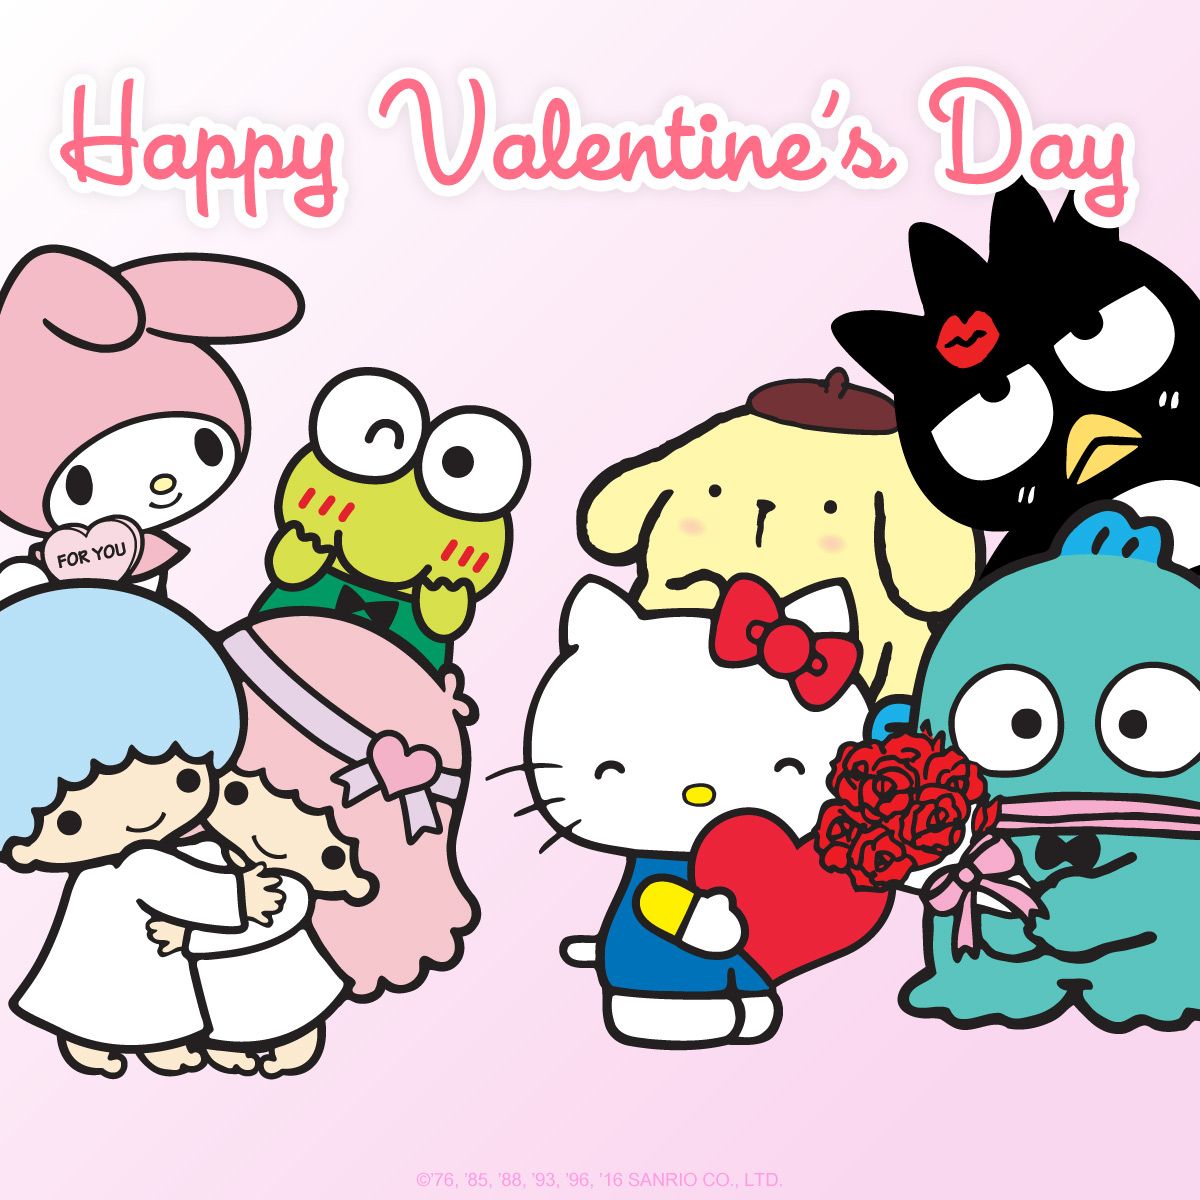 Wishing you a Valentine's Day filled with friendship and love!〜（ゝ。∂）. Hello kitty, Sanrio hello kitty, Hello kitty art